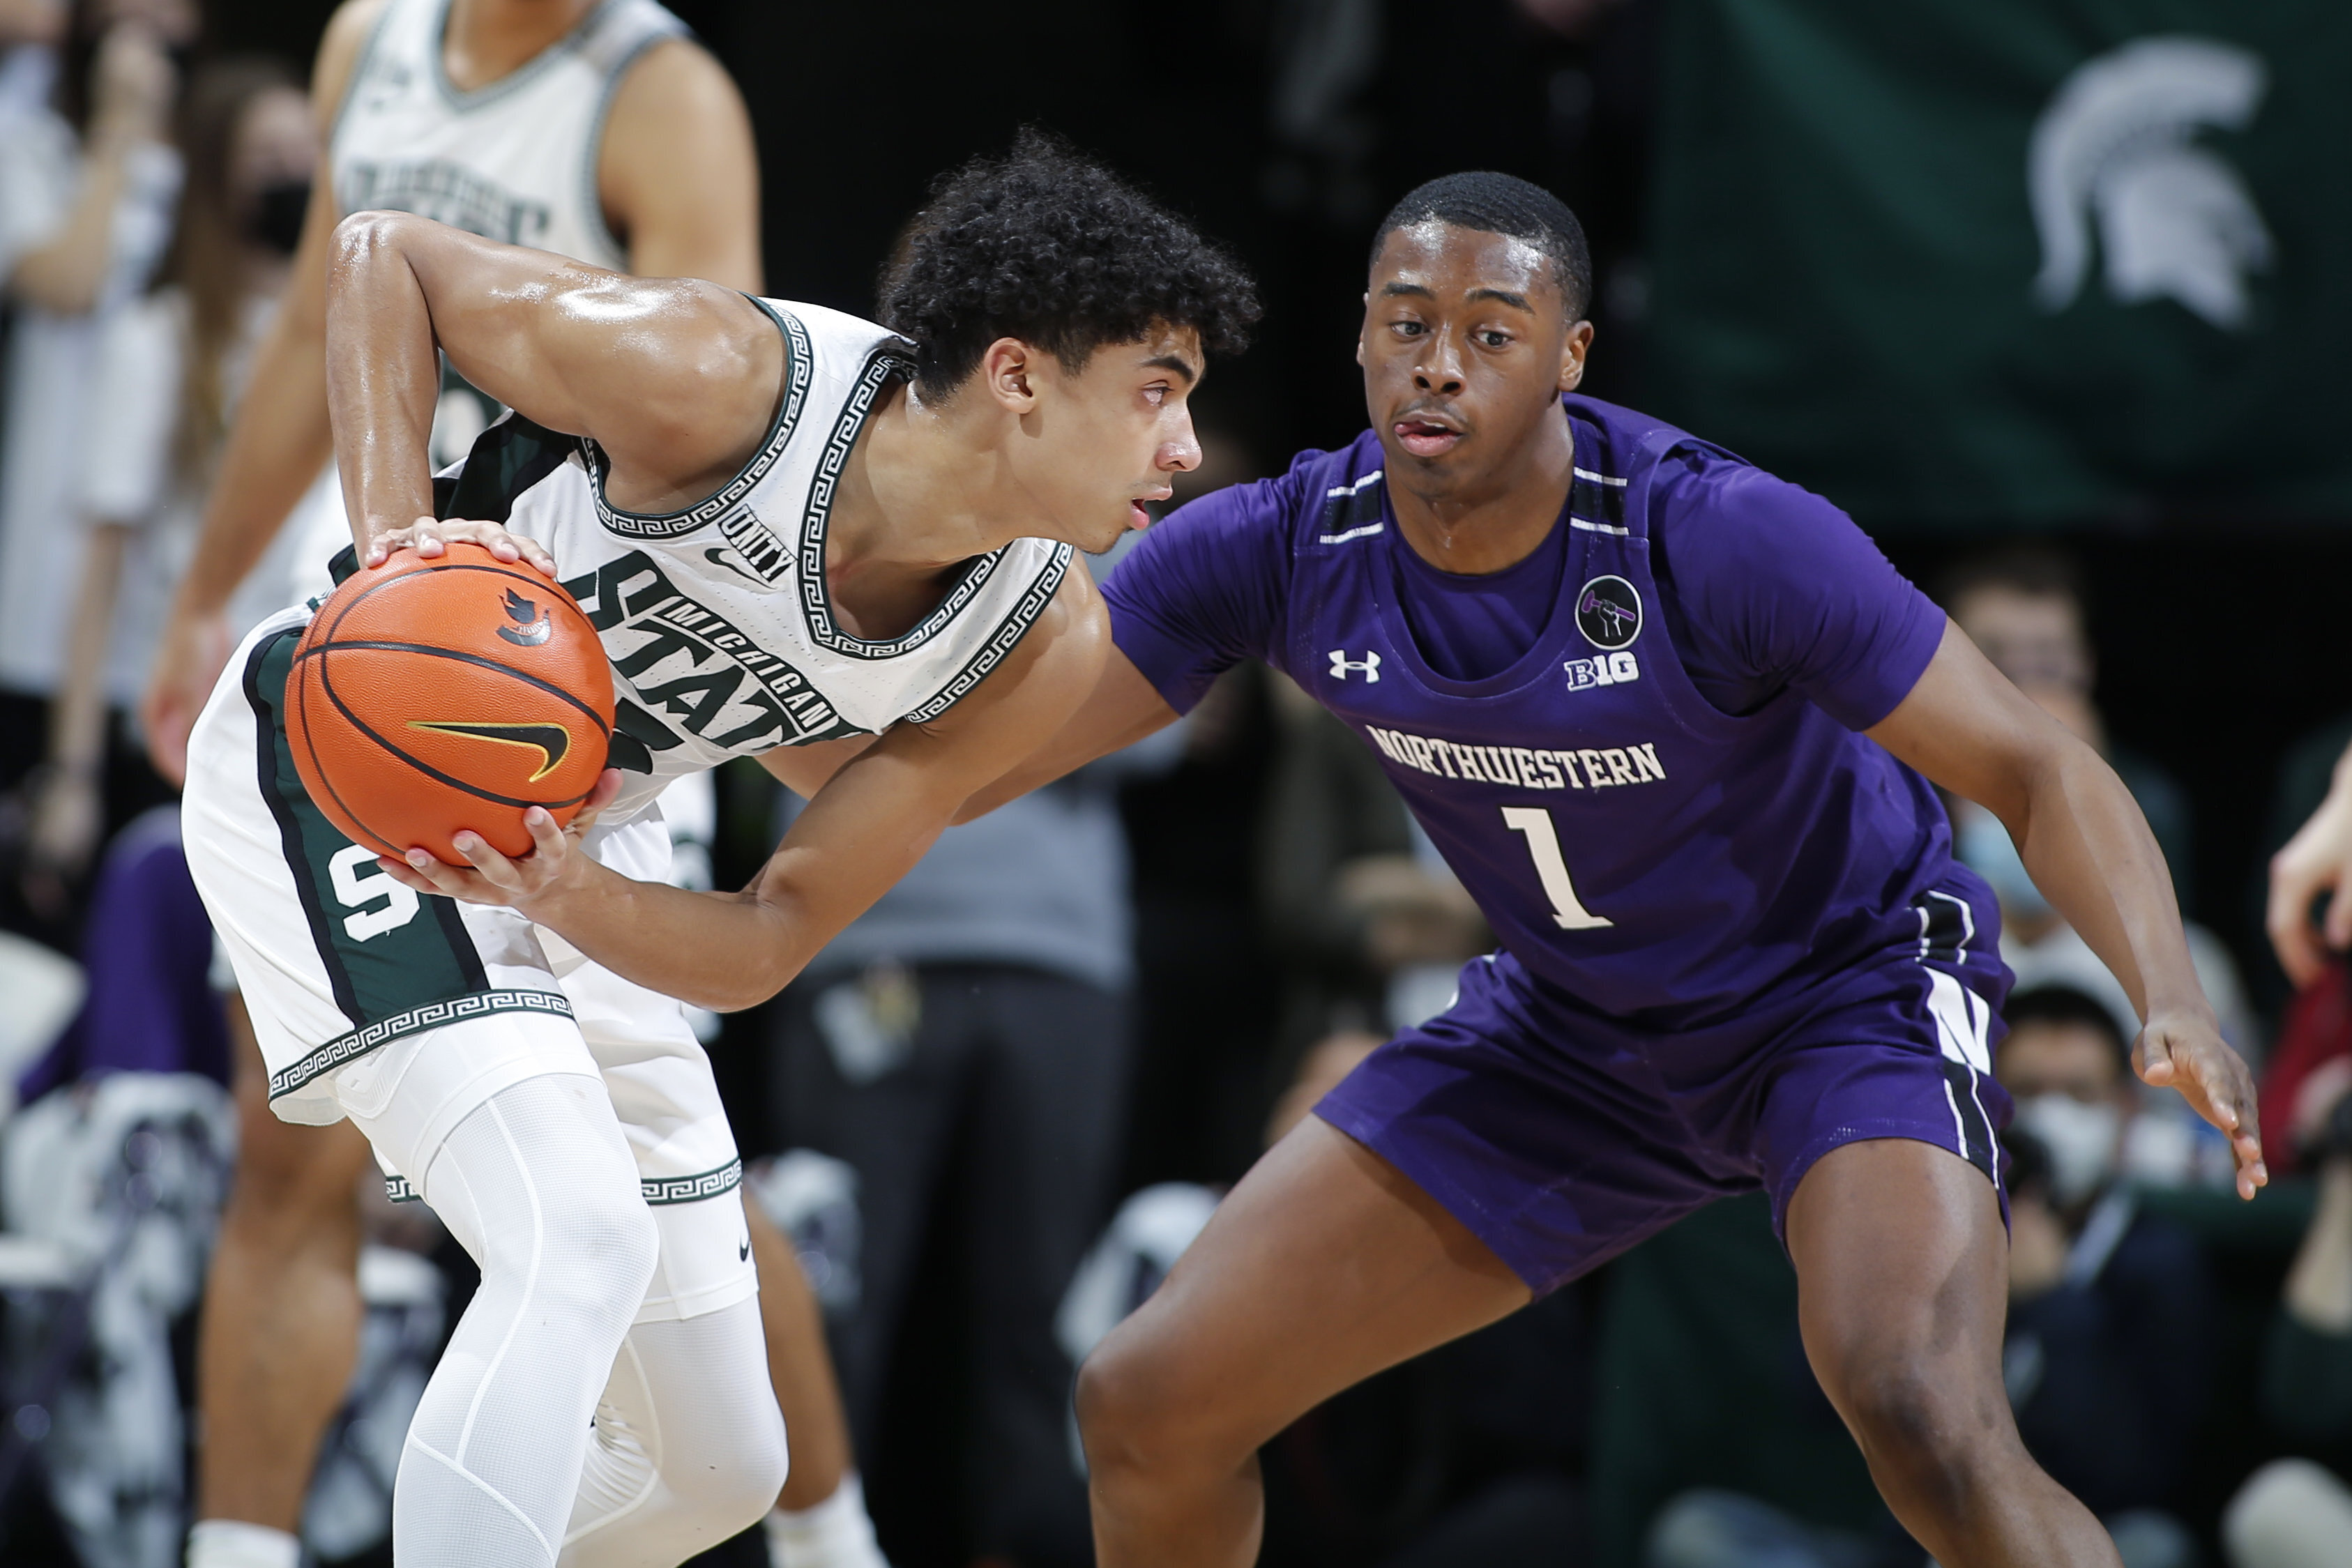 NBA draft: Michigan State's Max Christie goes to LA Lakers in Round 2